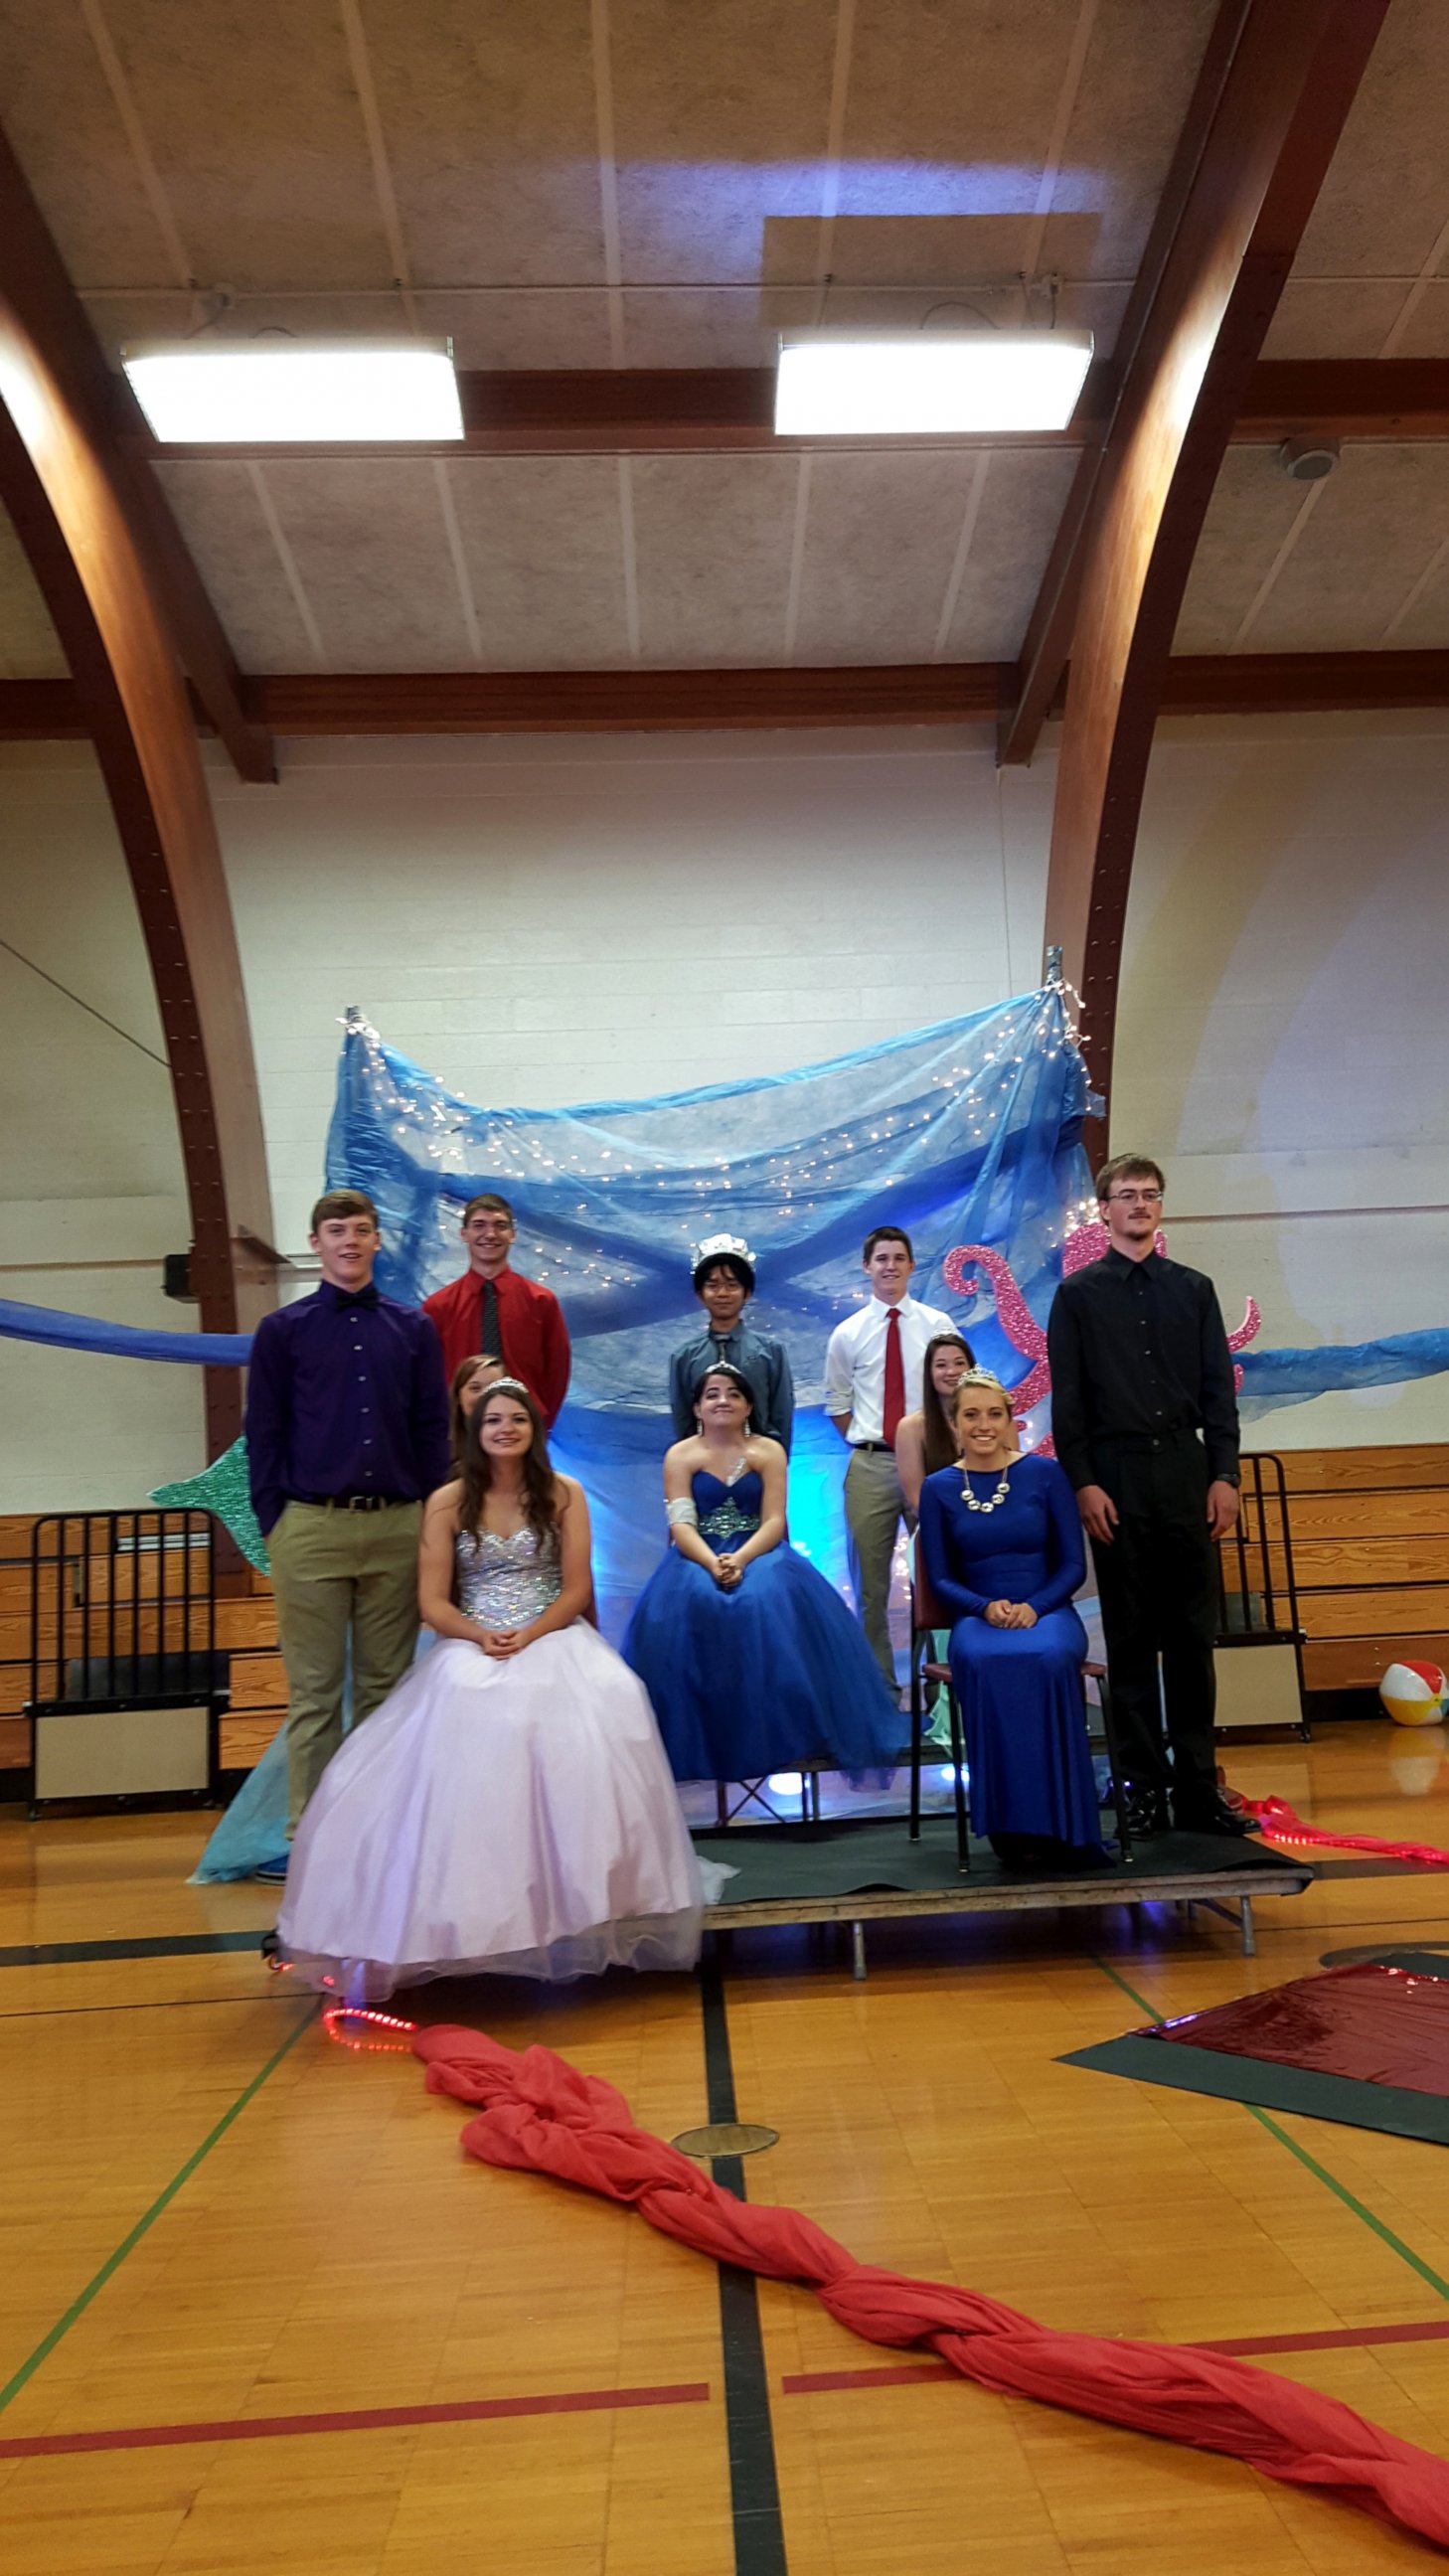 PHOTO: The prom court also came to Olivia Pelley's second prom so she could have her coronation as prom queen.